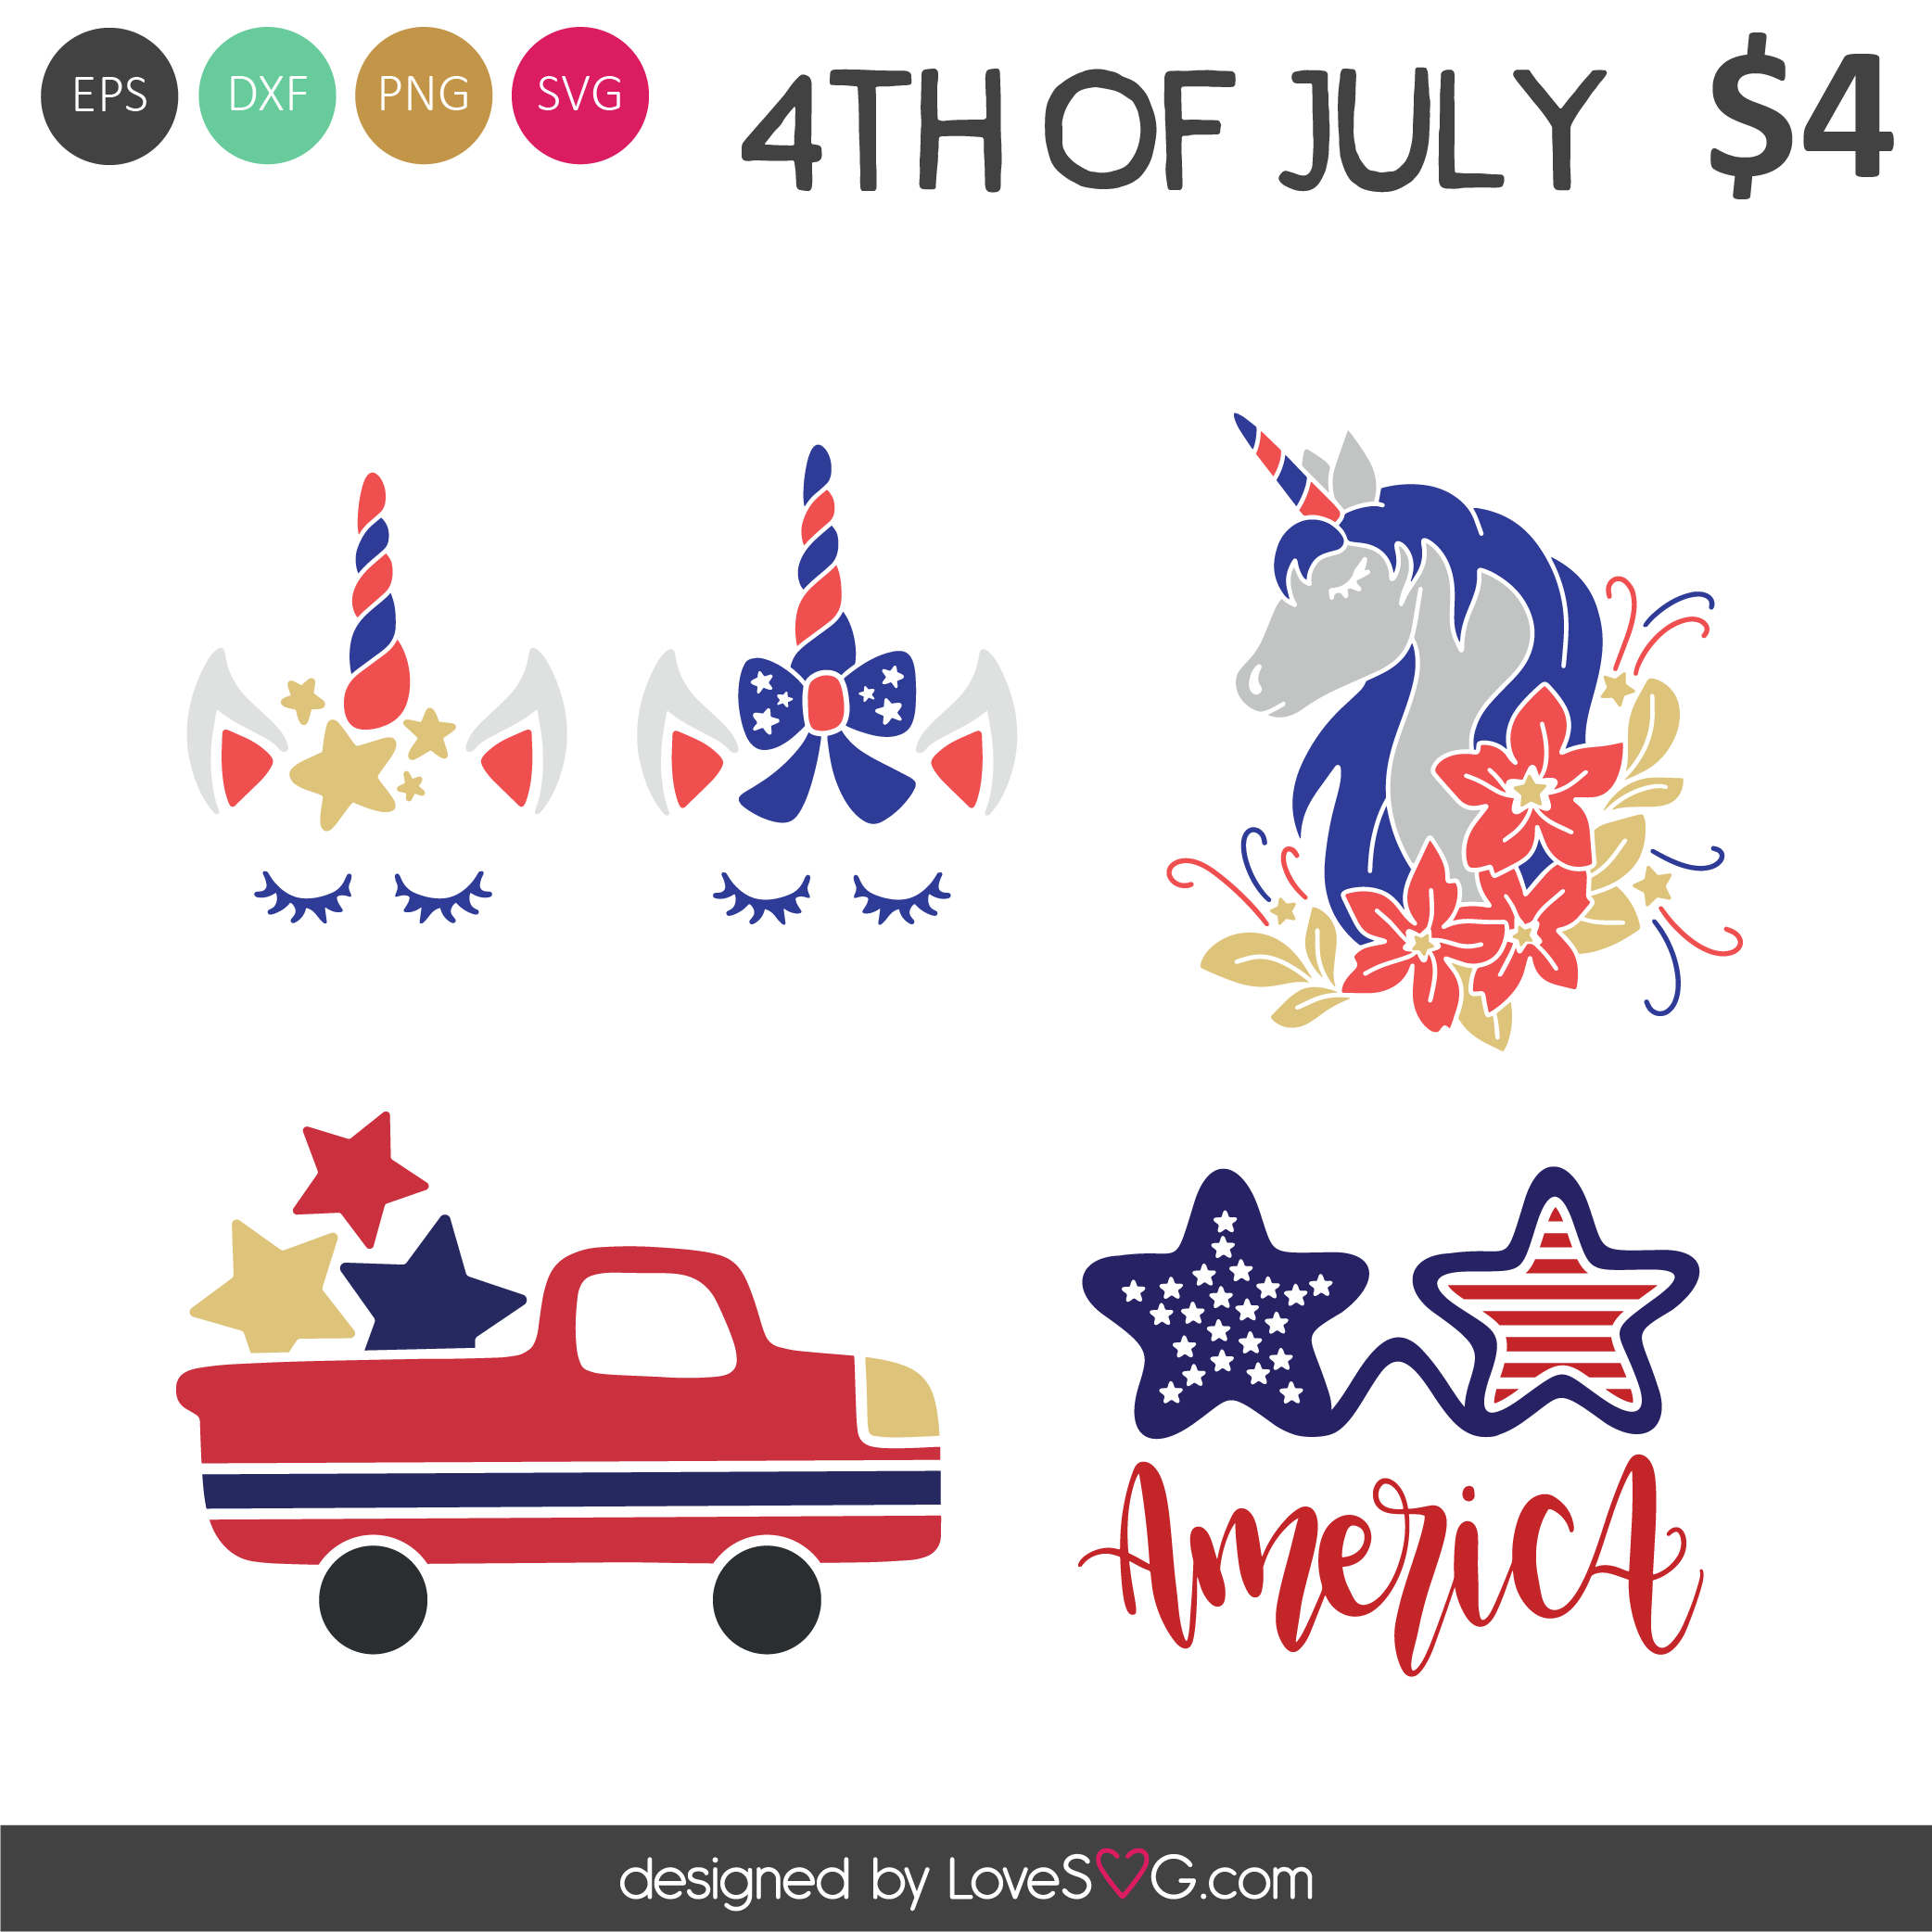 Download 4th Of July Truck And Unicorn Svg Cut Files Lovesvg Com PSD Mockup Templates